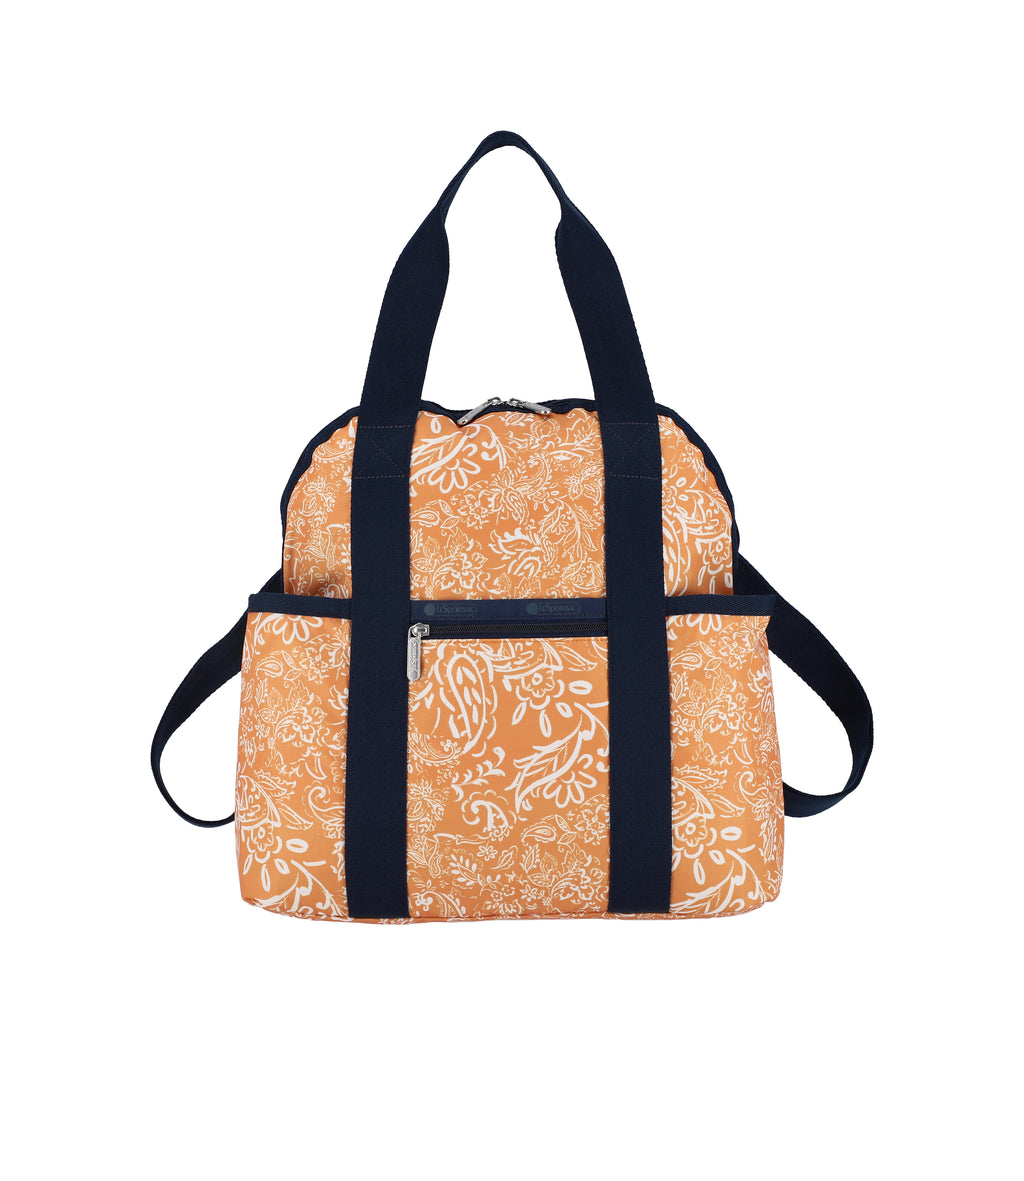 Patch Double Pocket Tote Bag